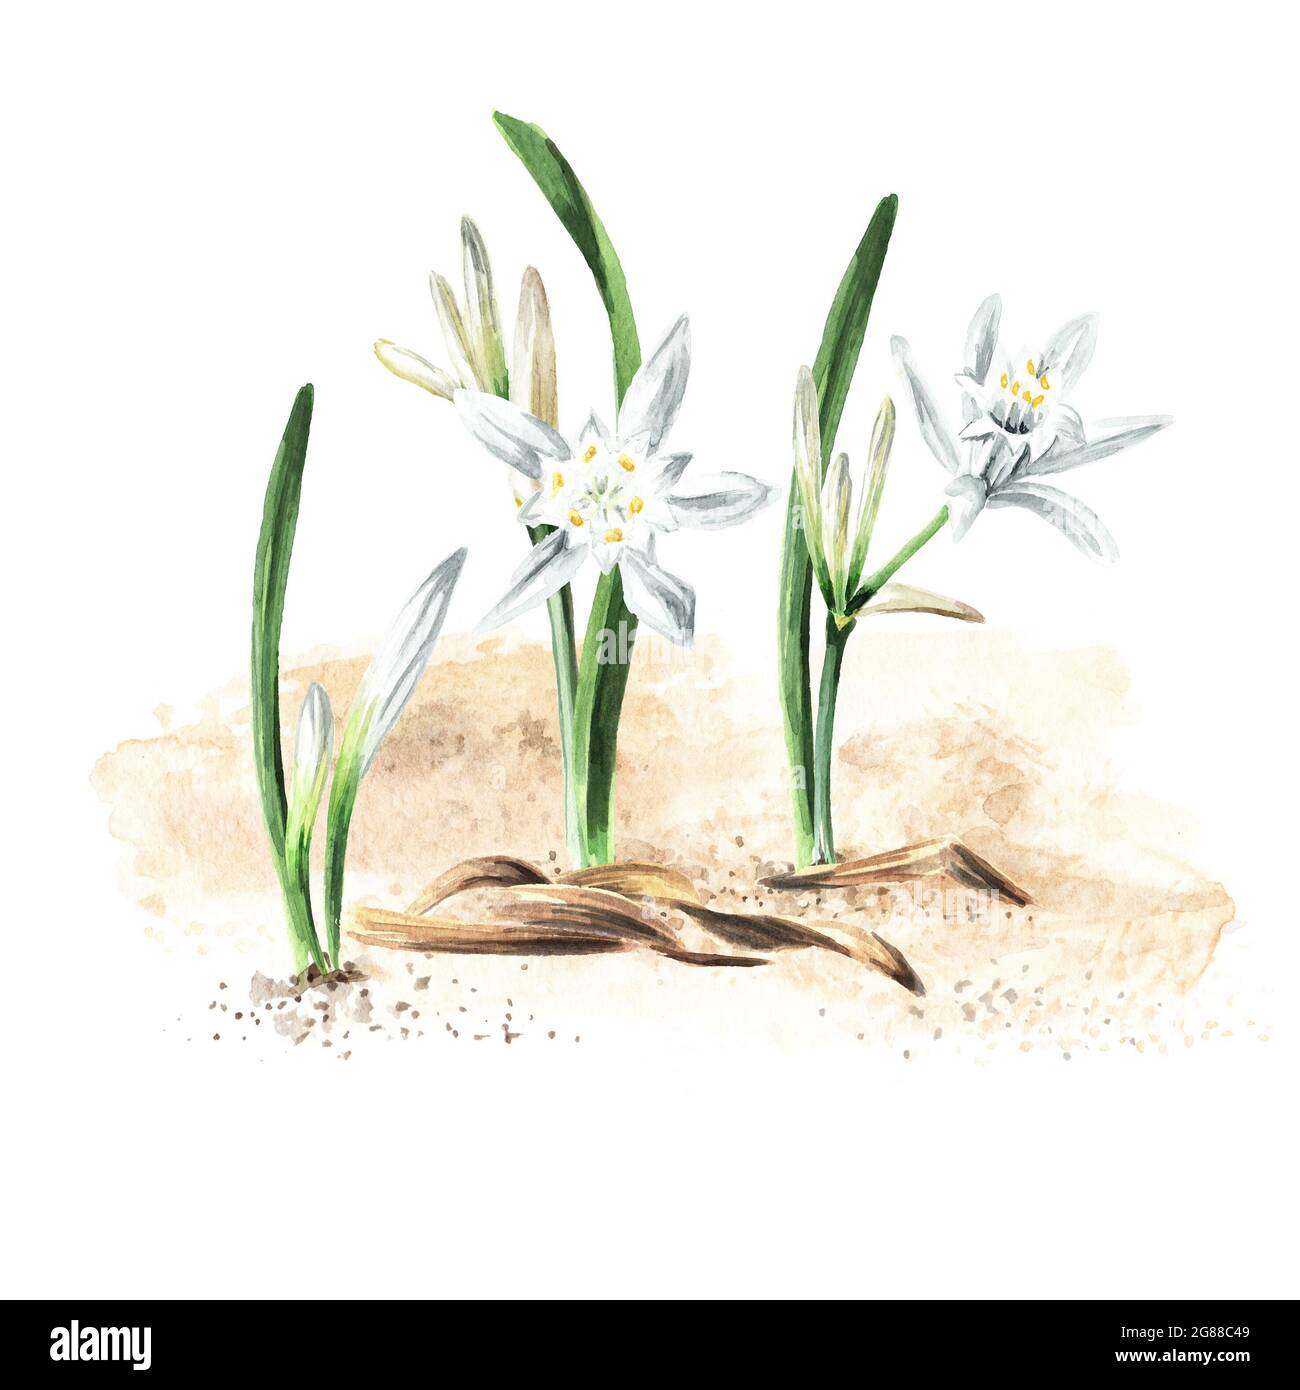 Pancratium maritimum or Lily of Sharon plant on the sand. Hand drawn watercolor illustration, isolated on white background Stock Photo